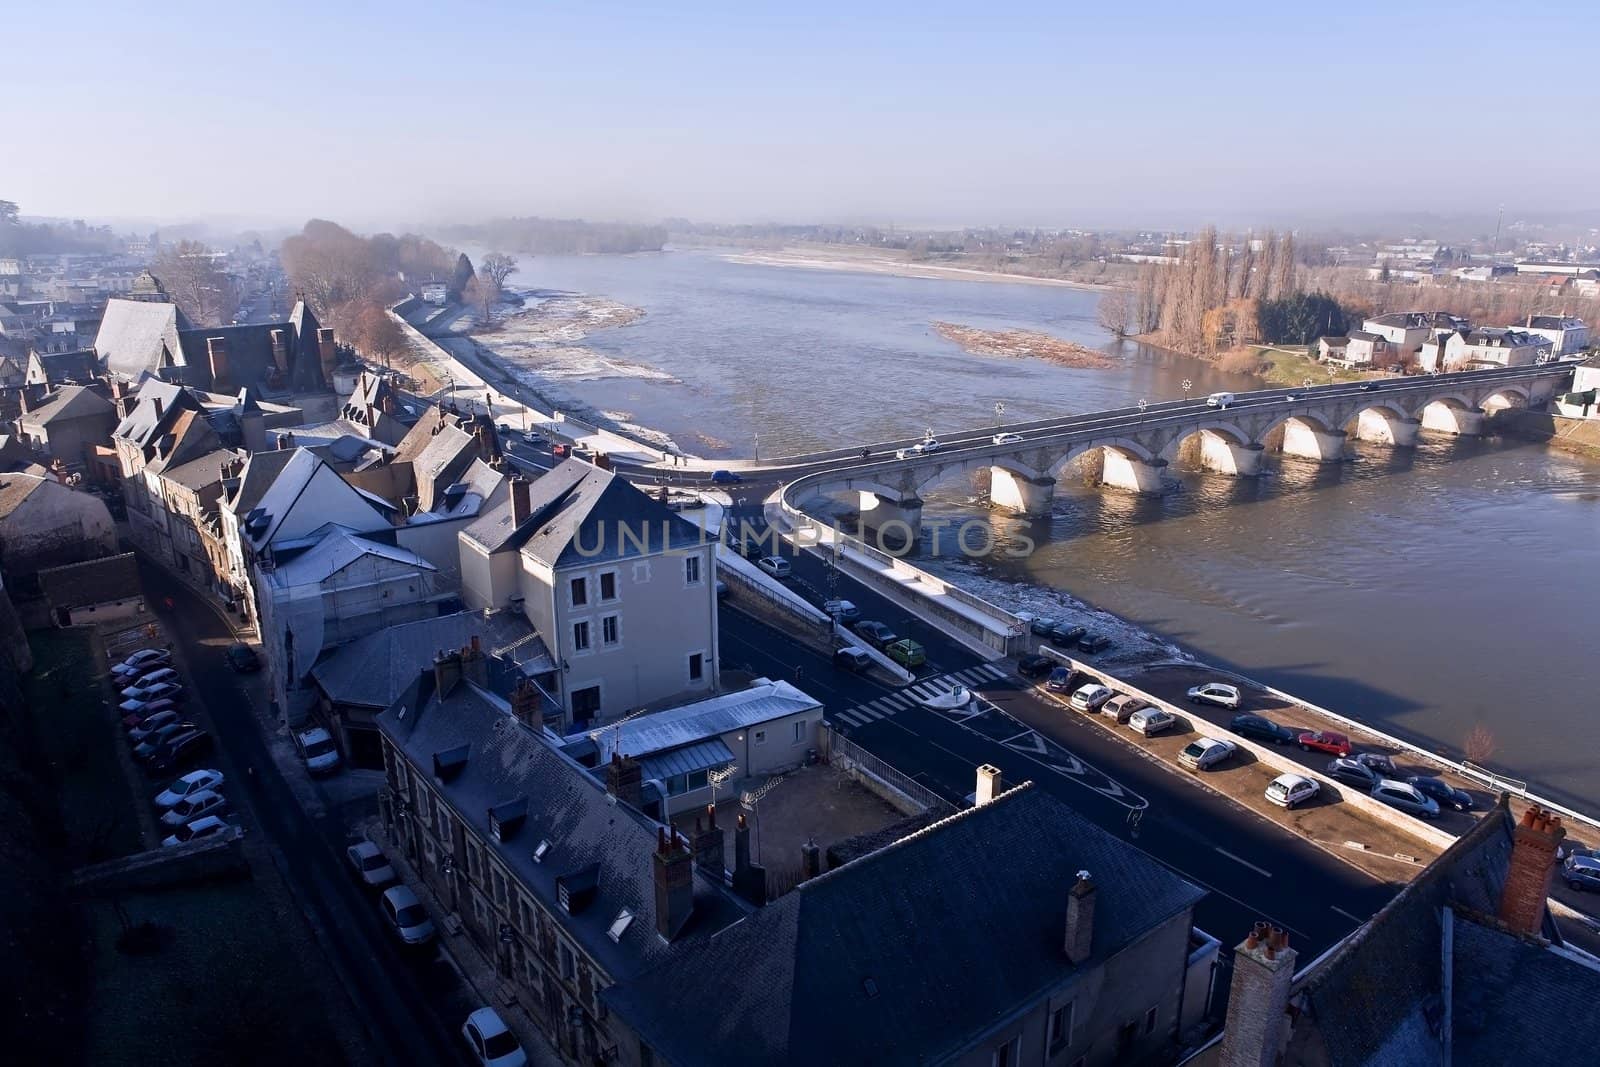 The picture is made from a viewing platform of castle Amboise